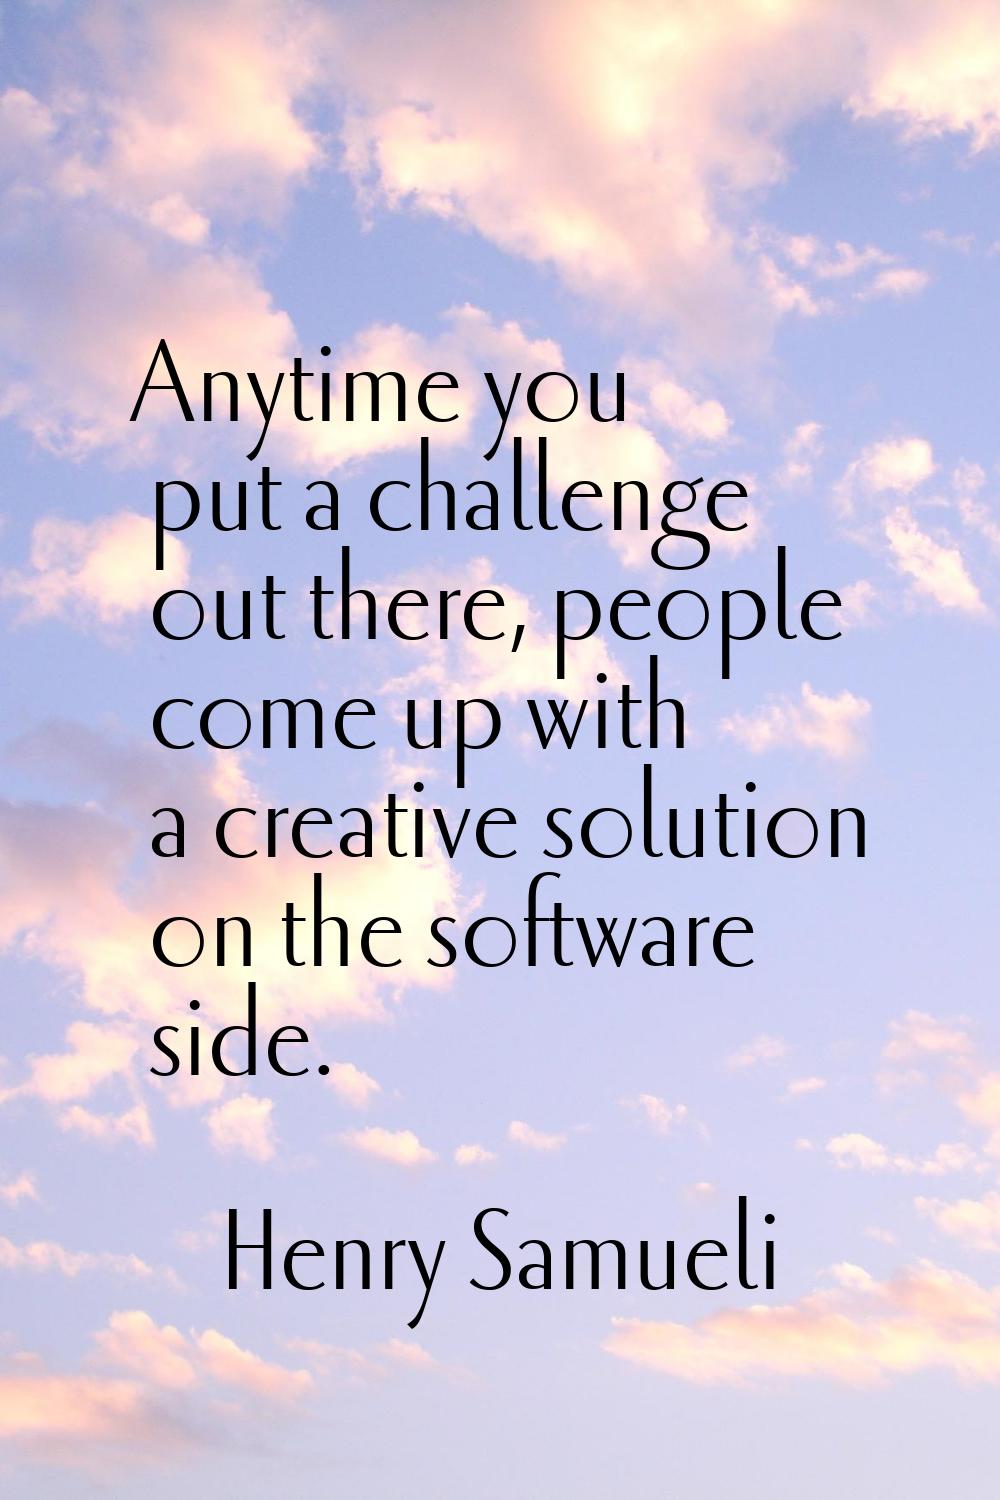 Anytime you put a challenge out there, people come up with a creative solution on the software side